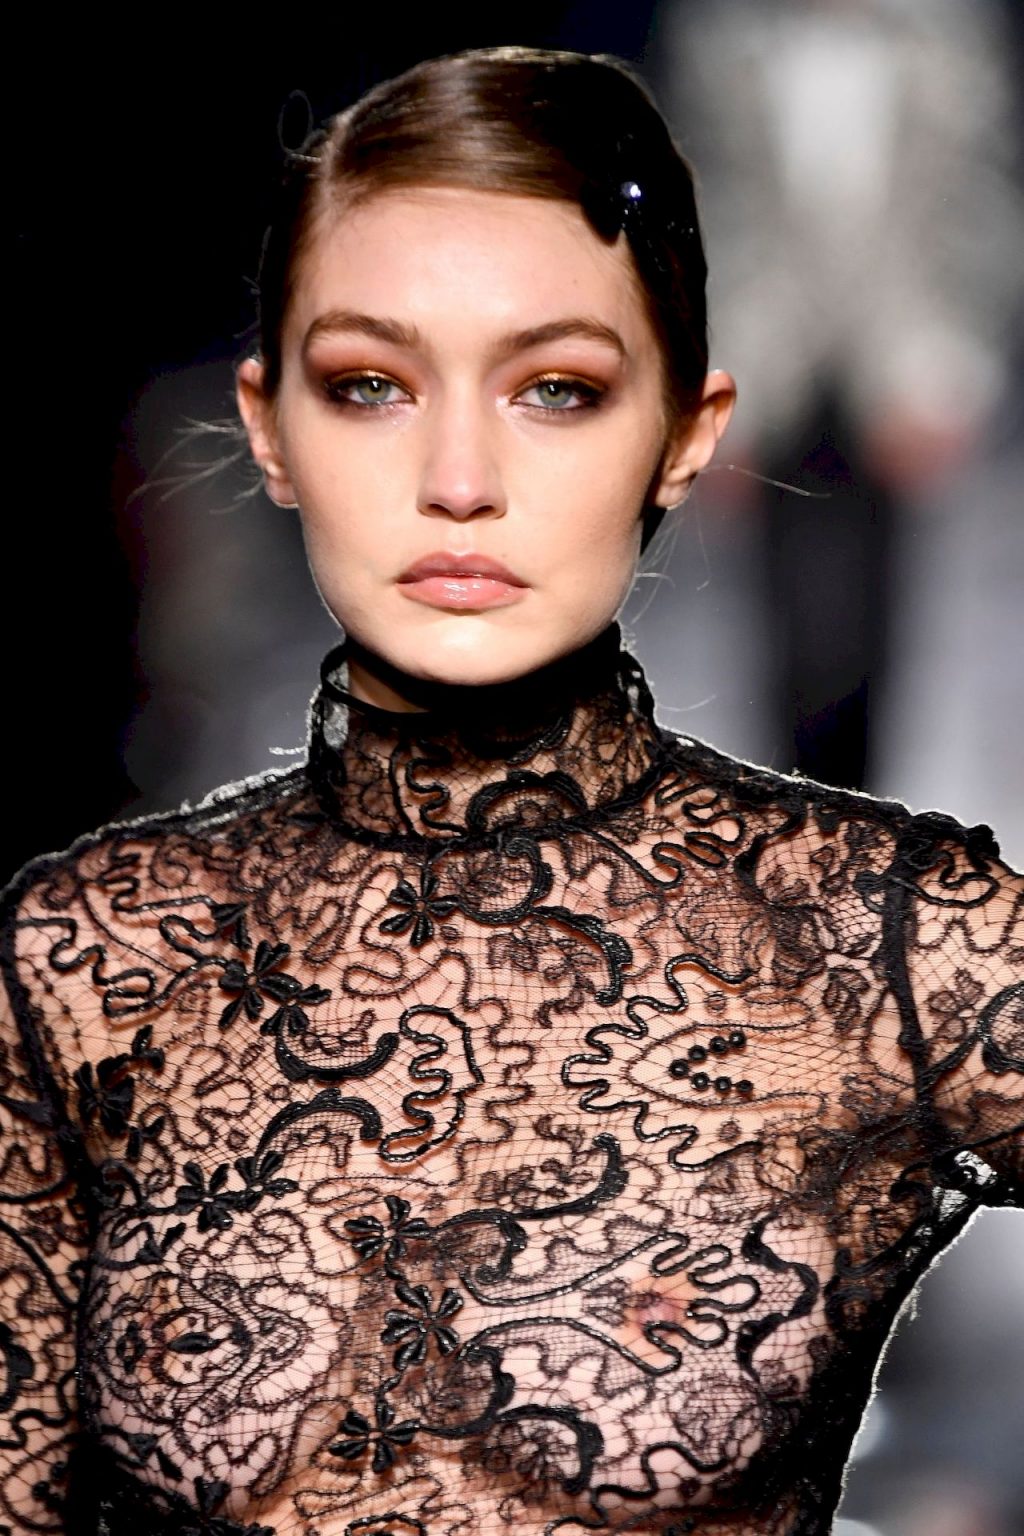 Gigi Hadid Flaunts Her Nude Tits at the Fashion Show (22 Photos + Video)